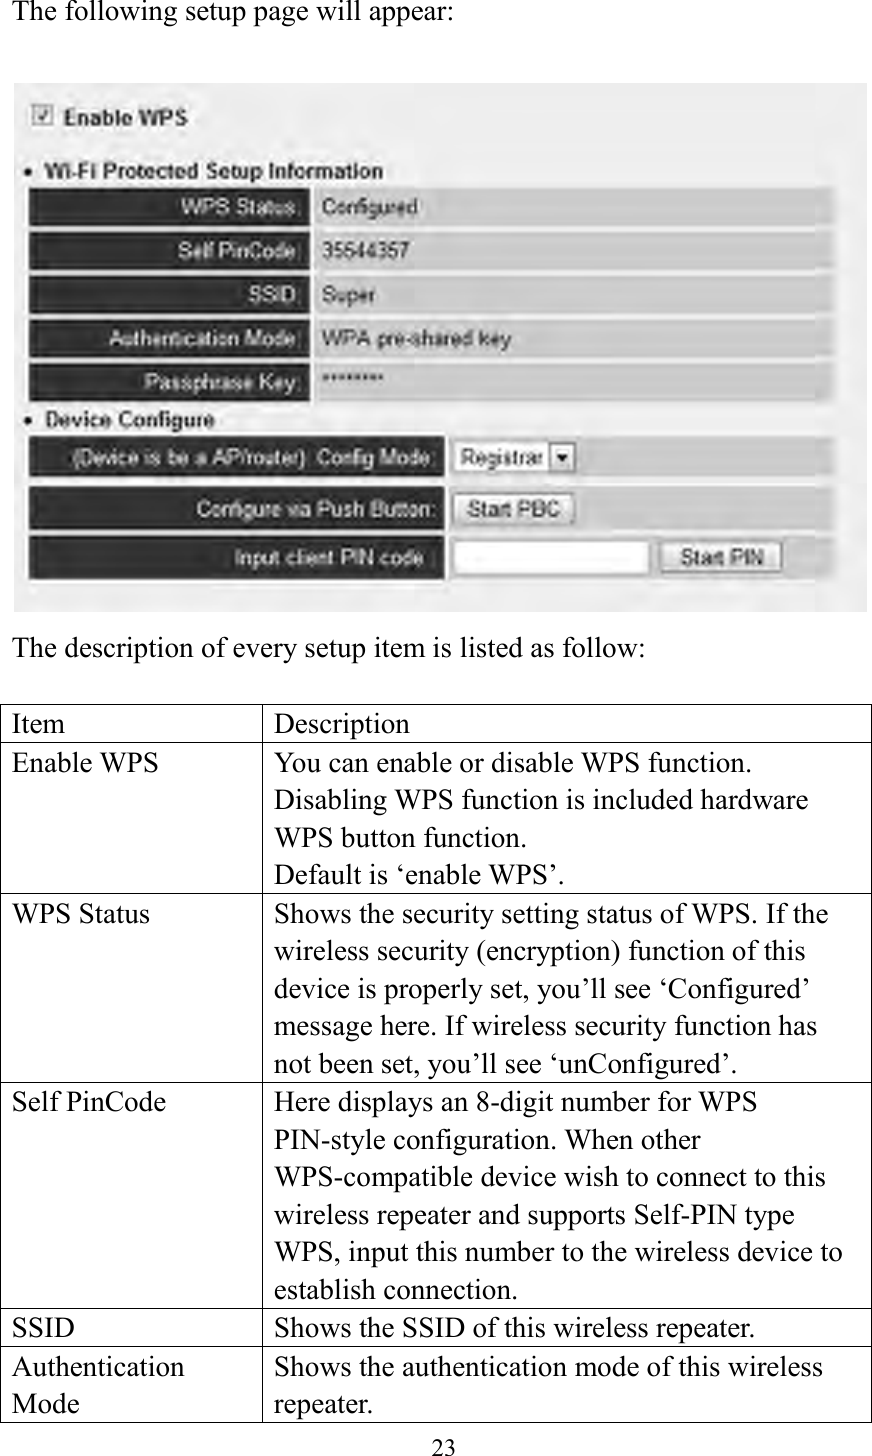  23  The following setup page will appear:   The description of every setup item is listed as follow:  Item Description Enable WPS You can enable or disable WPS function. Disabling WPS function is included hardware WPS button function.   Default is ‘enable WPS’.   WPS Status Shows the security setting status of WPS. If the wireless security (encryption) function of this device is properly set, you’ll see ‘Configured’ message here. If wireless security function has not been set, you’ll see ‘unConfigured’. Self PinCode Here displays an 8-digit number for WPS PIN-style configuration. When other WPS-compatible device wish to connect to this wireless repeater and supports Self-PIN type WPS, input this number to the wireless device to establish connection. SSID Shows the SSID of this wireless repeater. Authentication Mode Shows the authentication mode of this wireless repeater. 